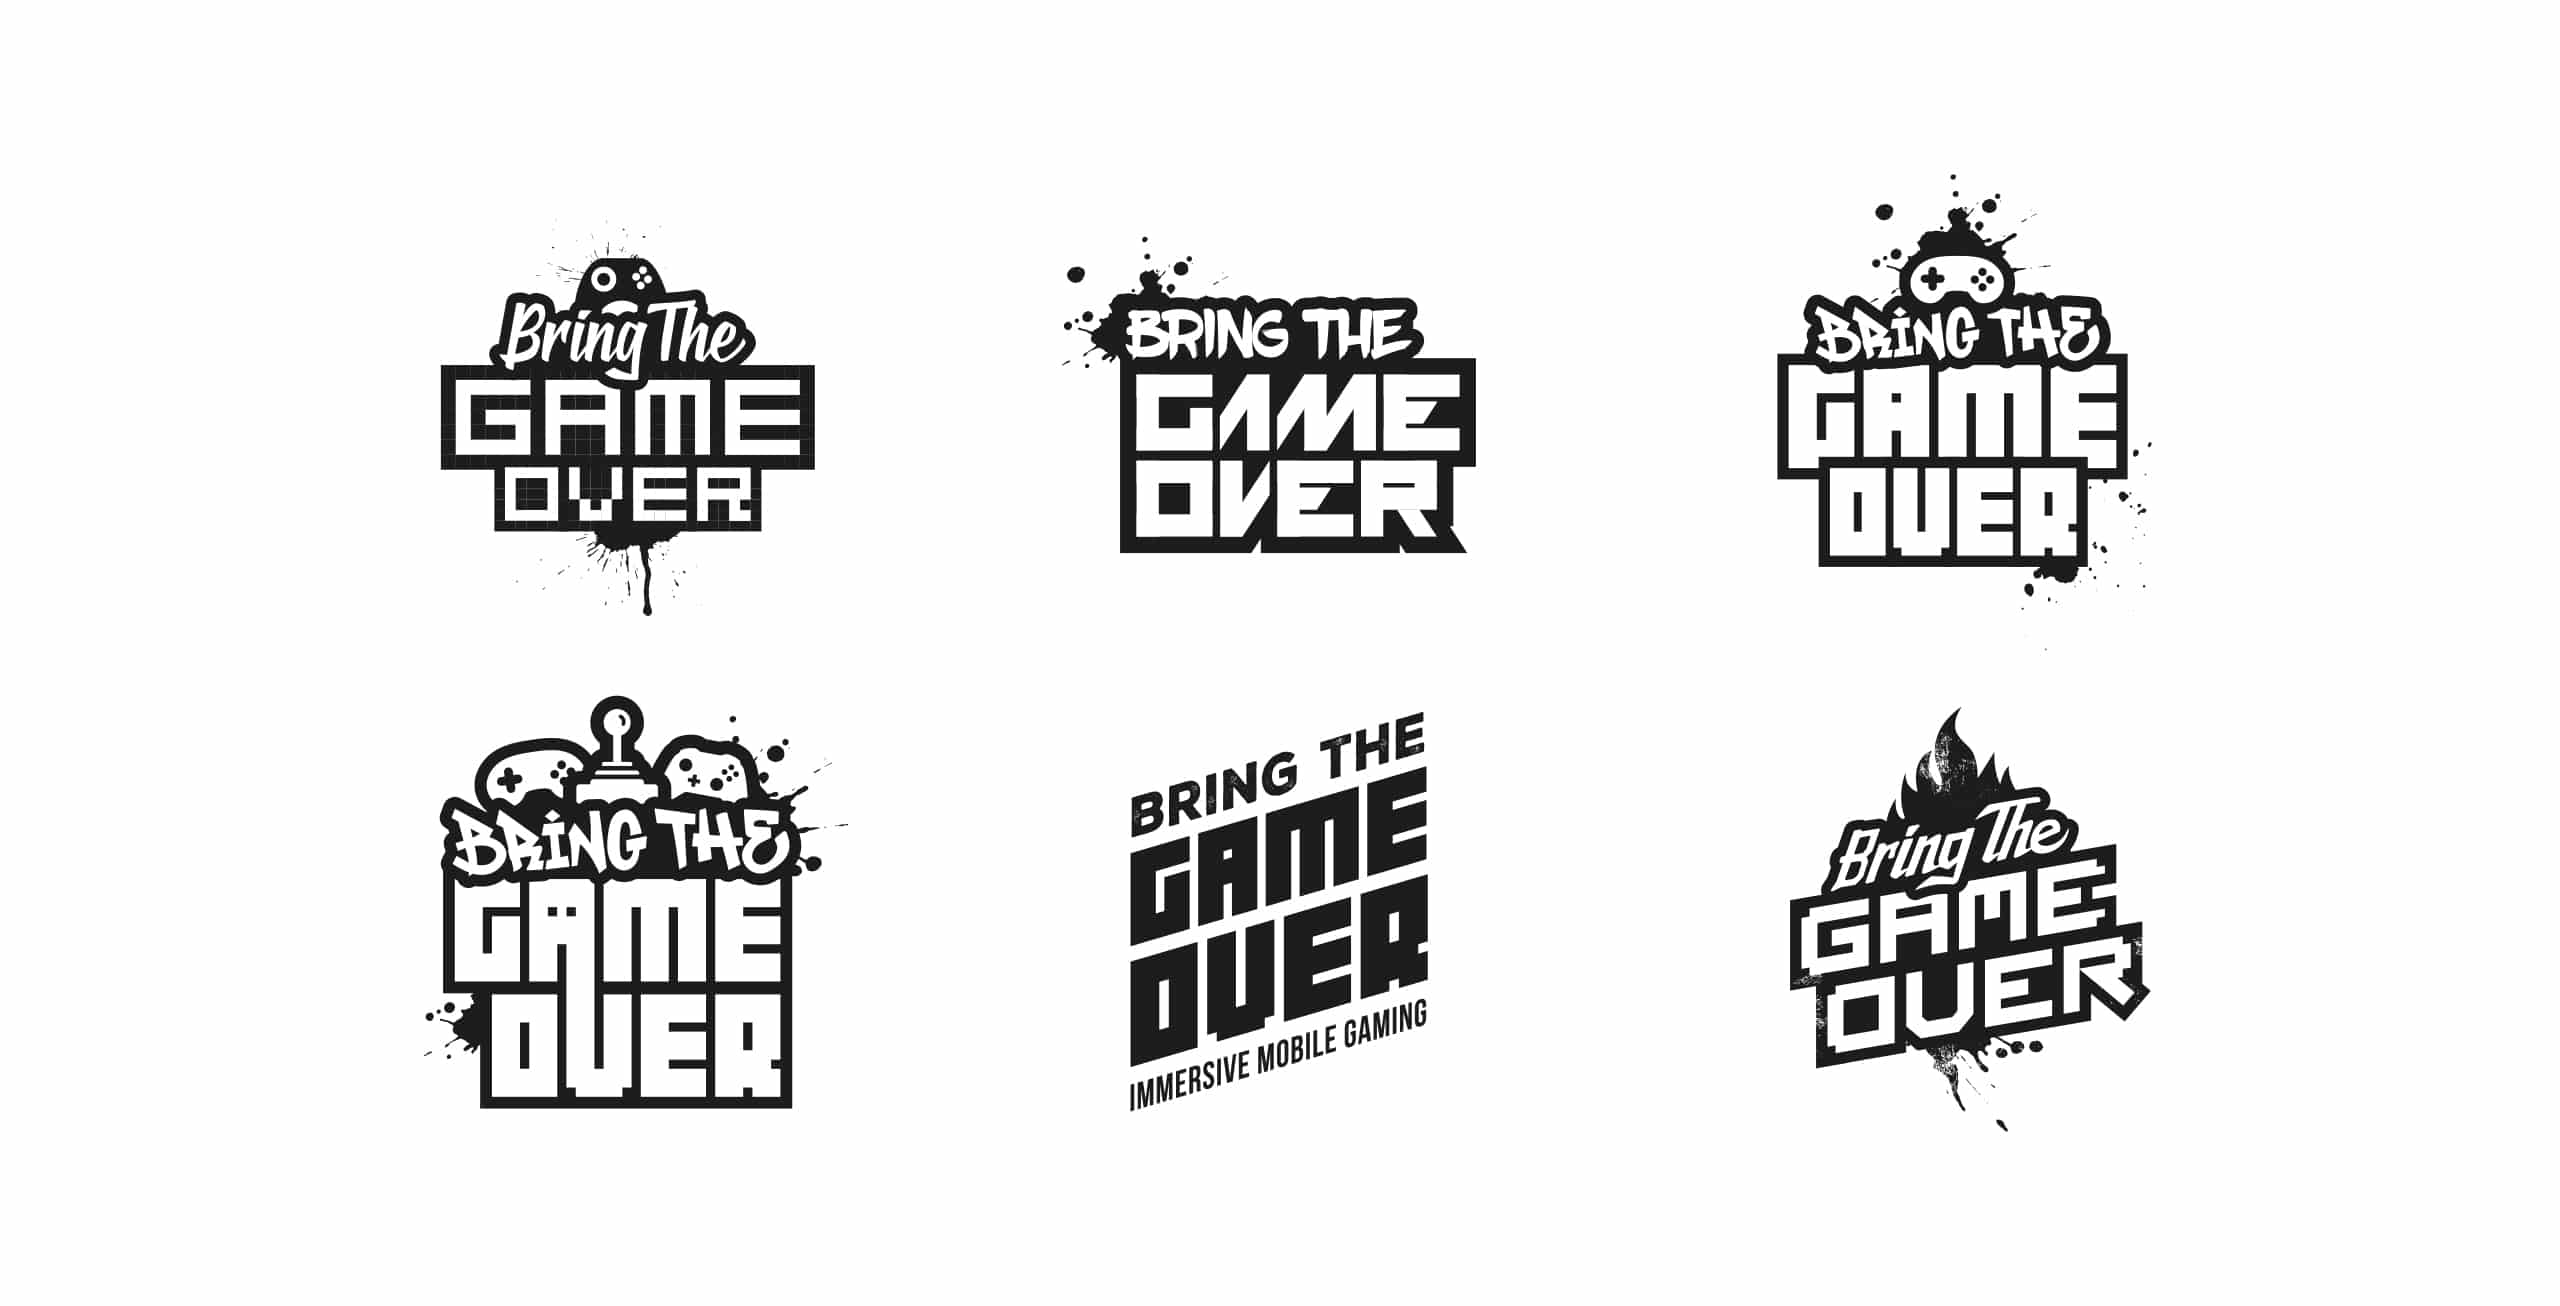 Bring the game over logo design options